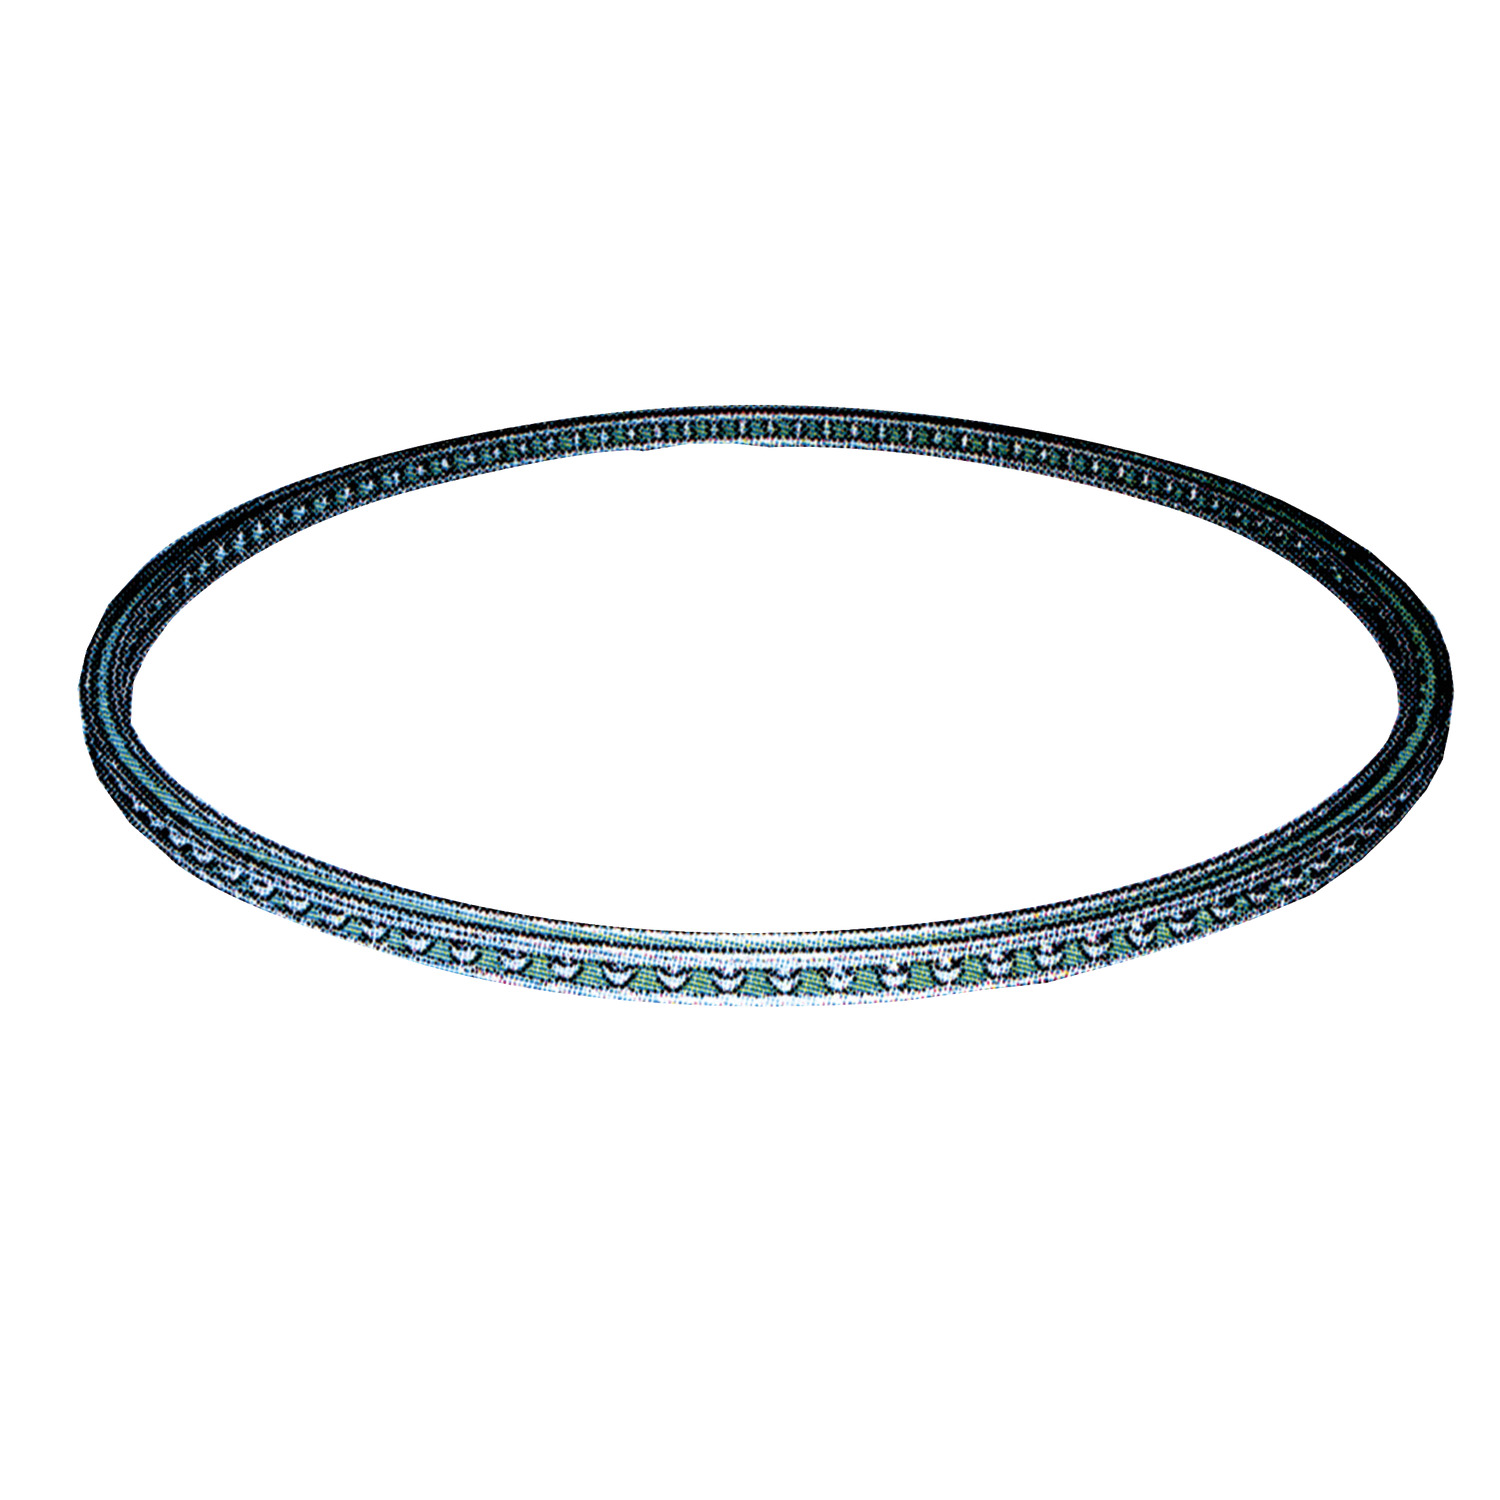 Product R4222.1, Ball Bearing - Wire metric, ground raceway / 